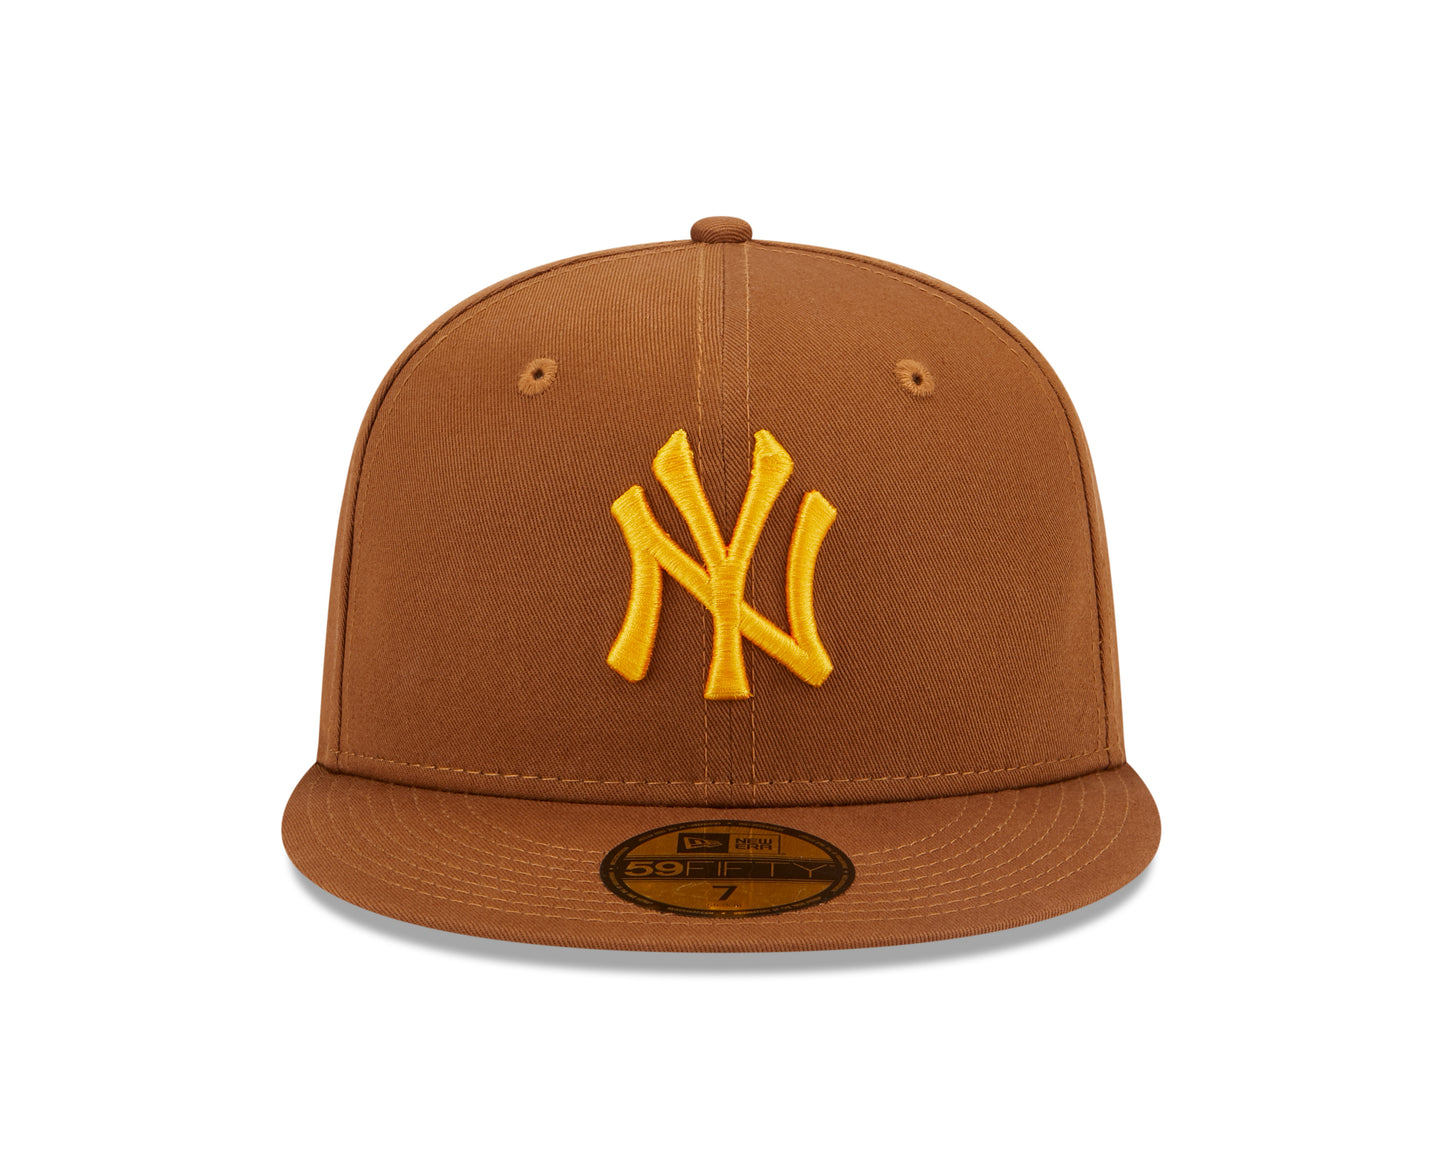 New Era 59Fifty Fitted Cap League Essential New York Yankees - Light Brown/Yellow - Headz Up 